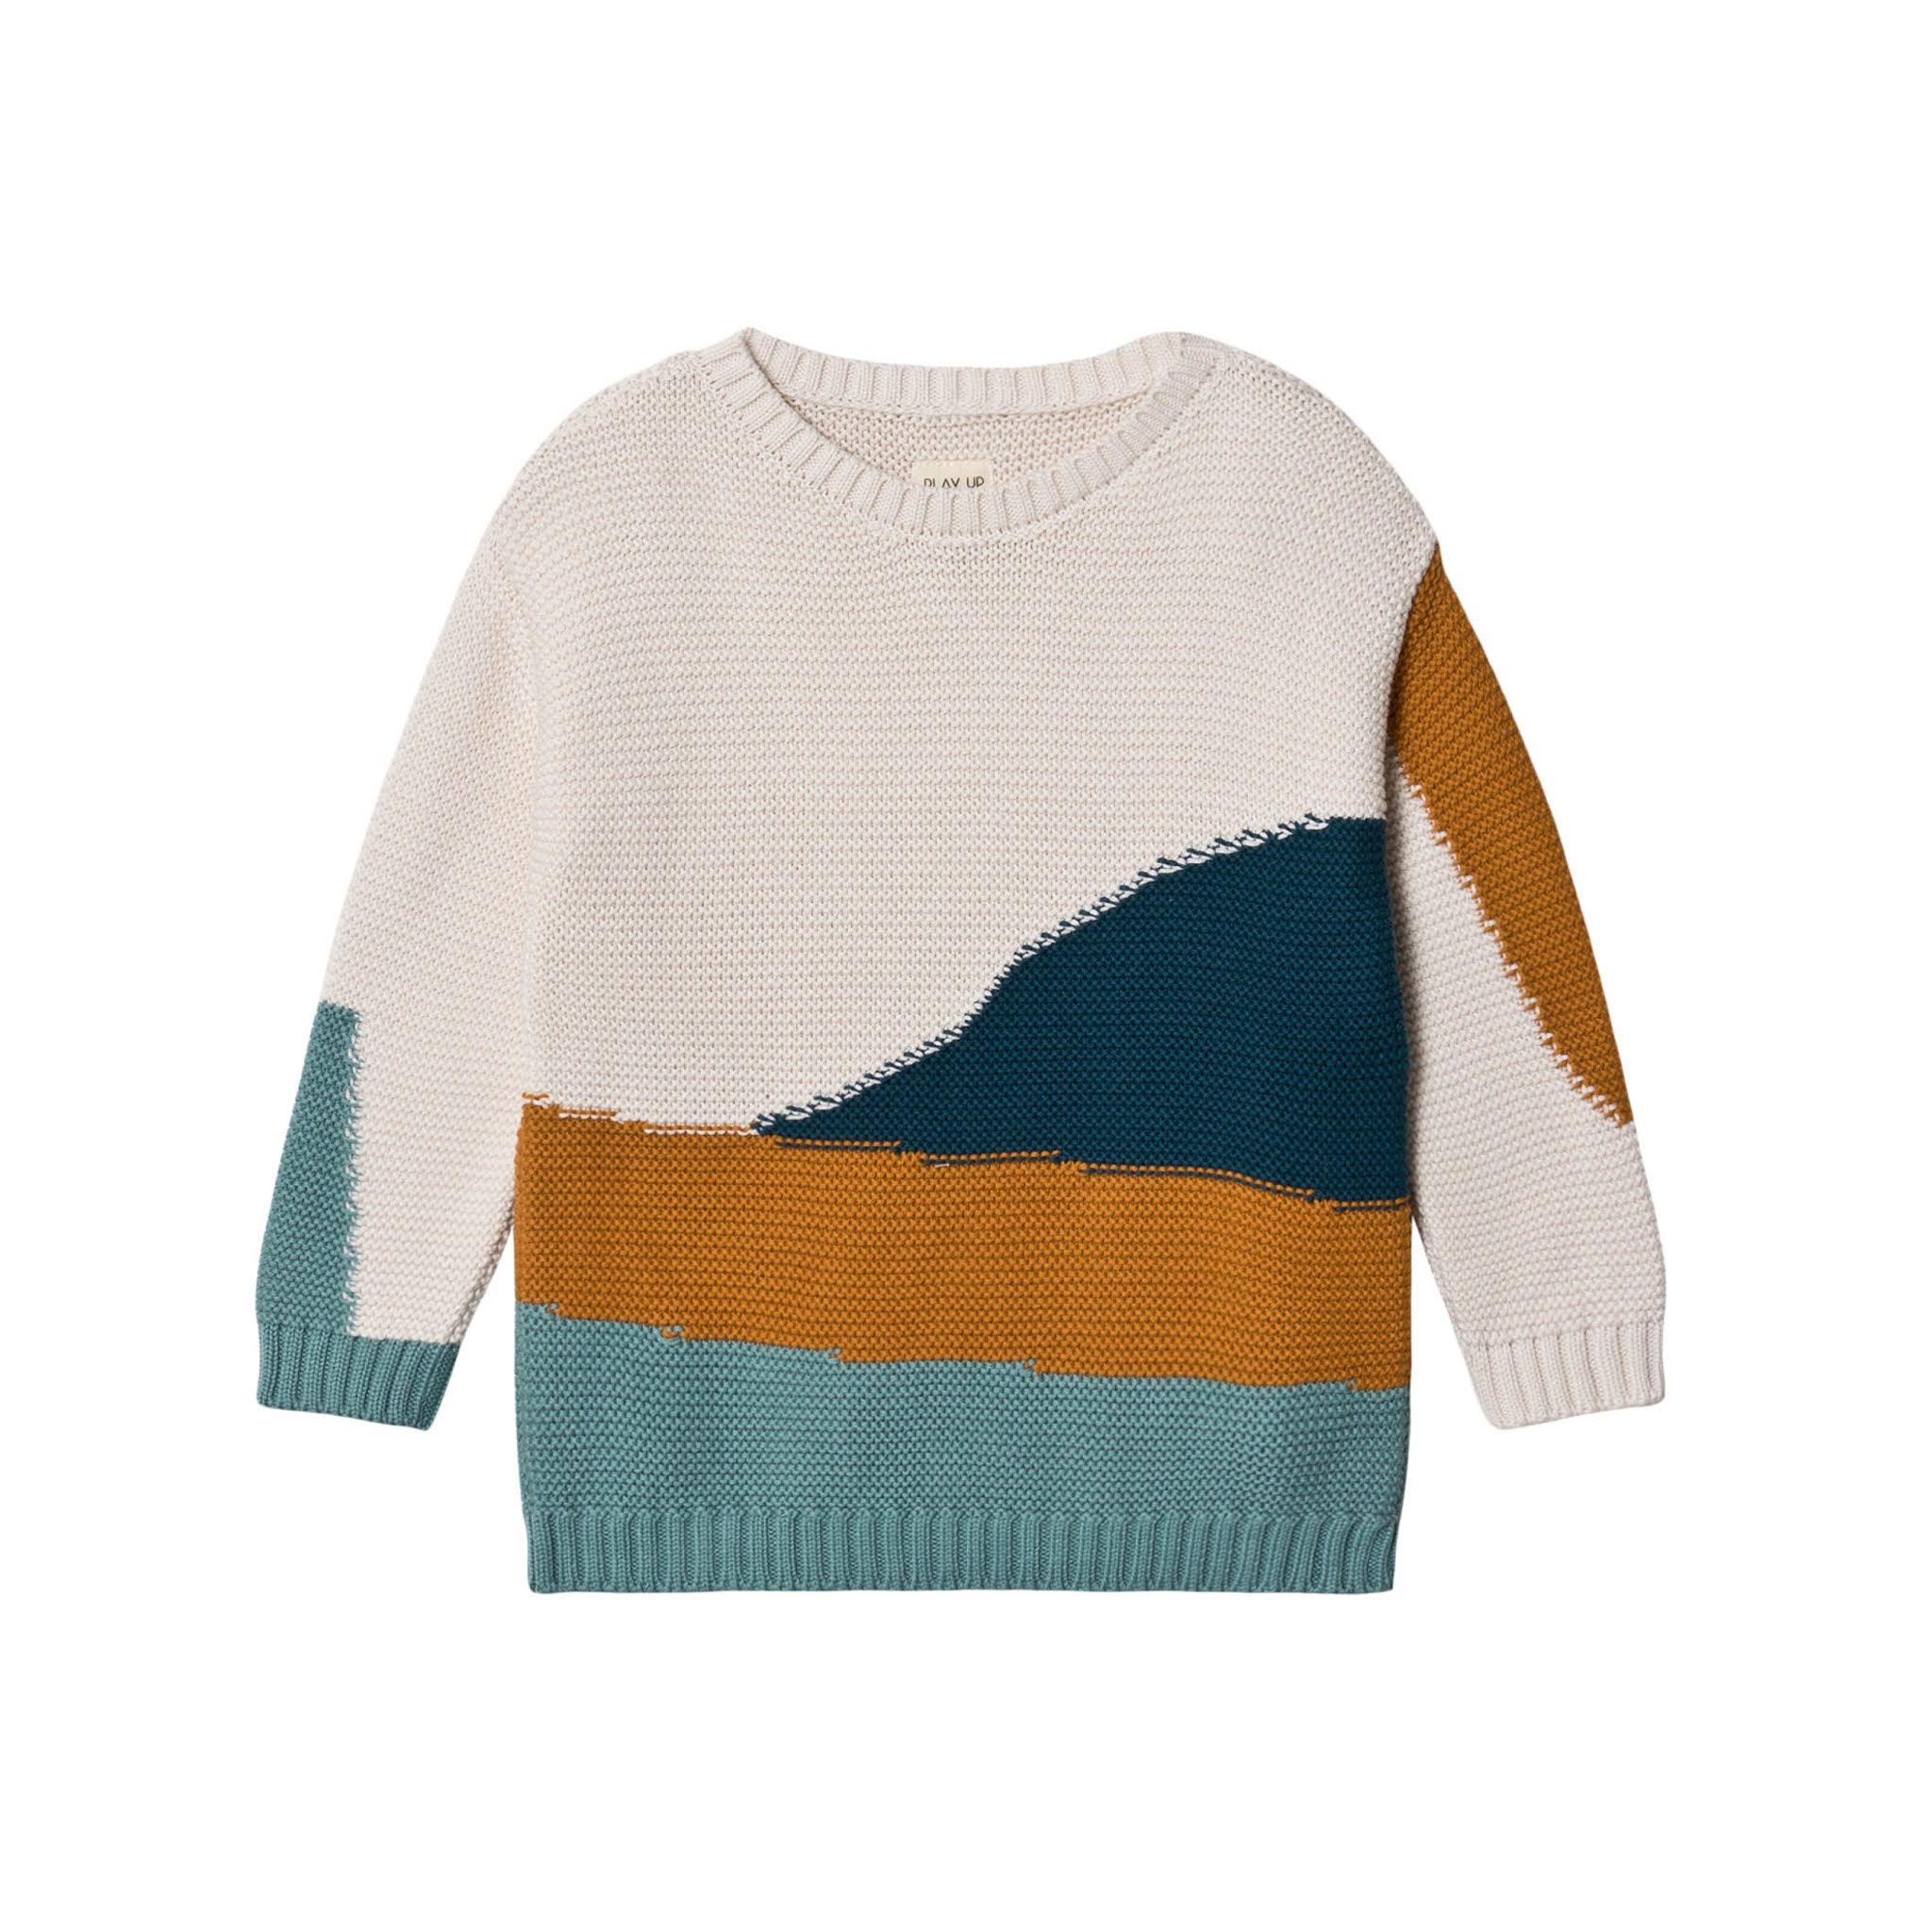 Kids Pearl Knitted Jumper from Play Up